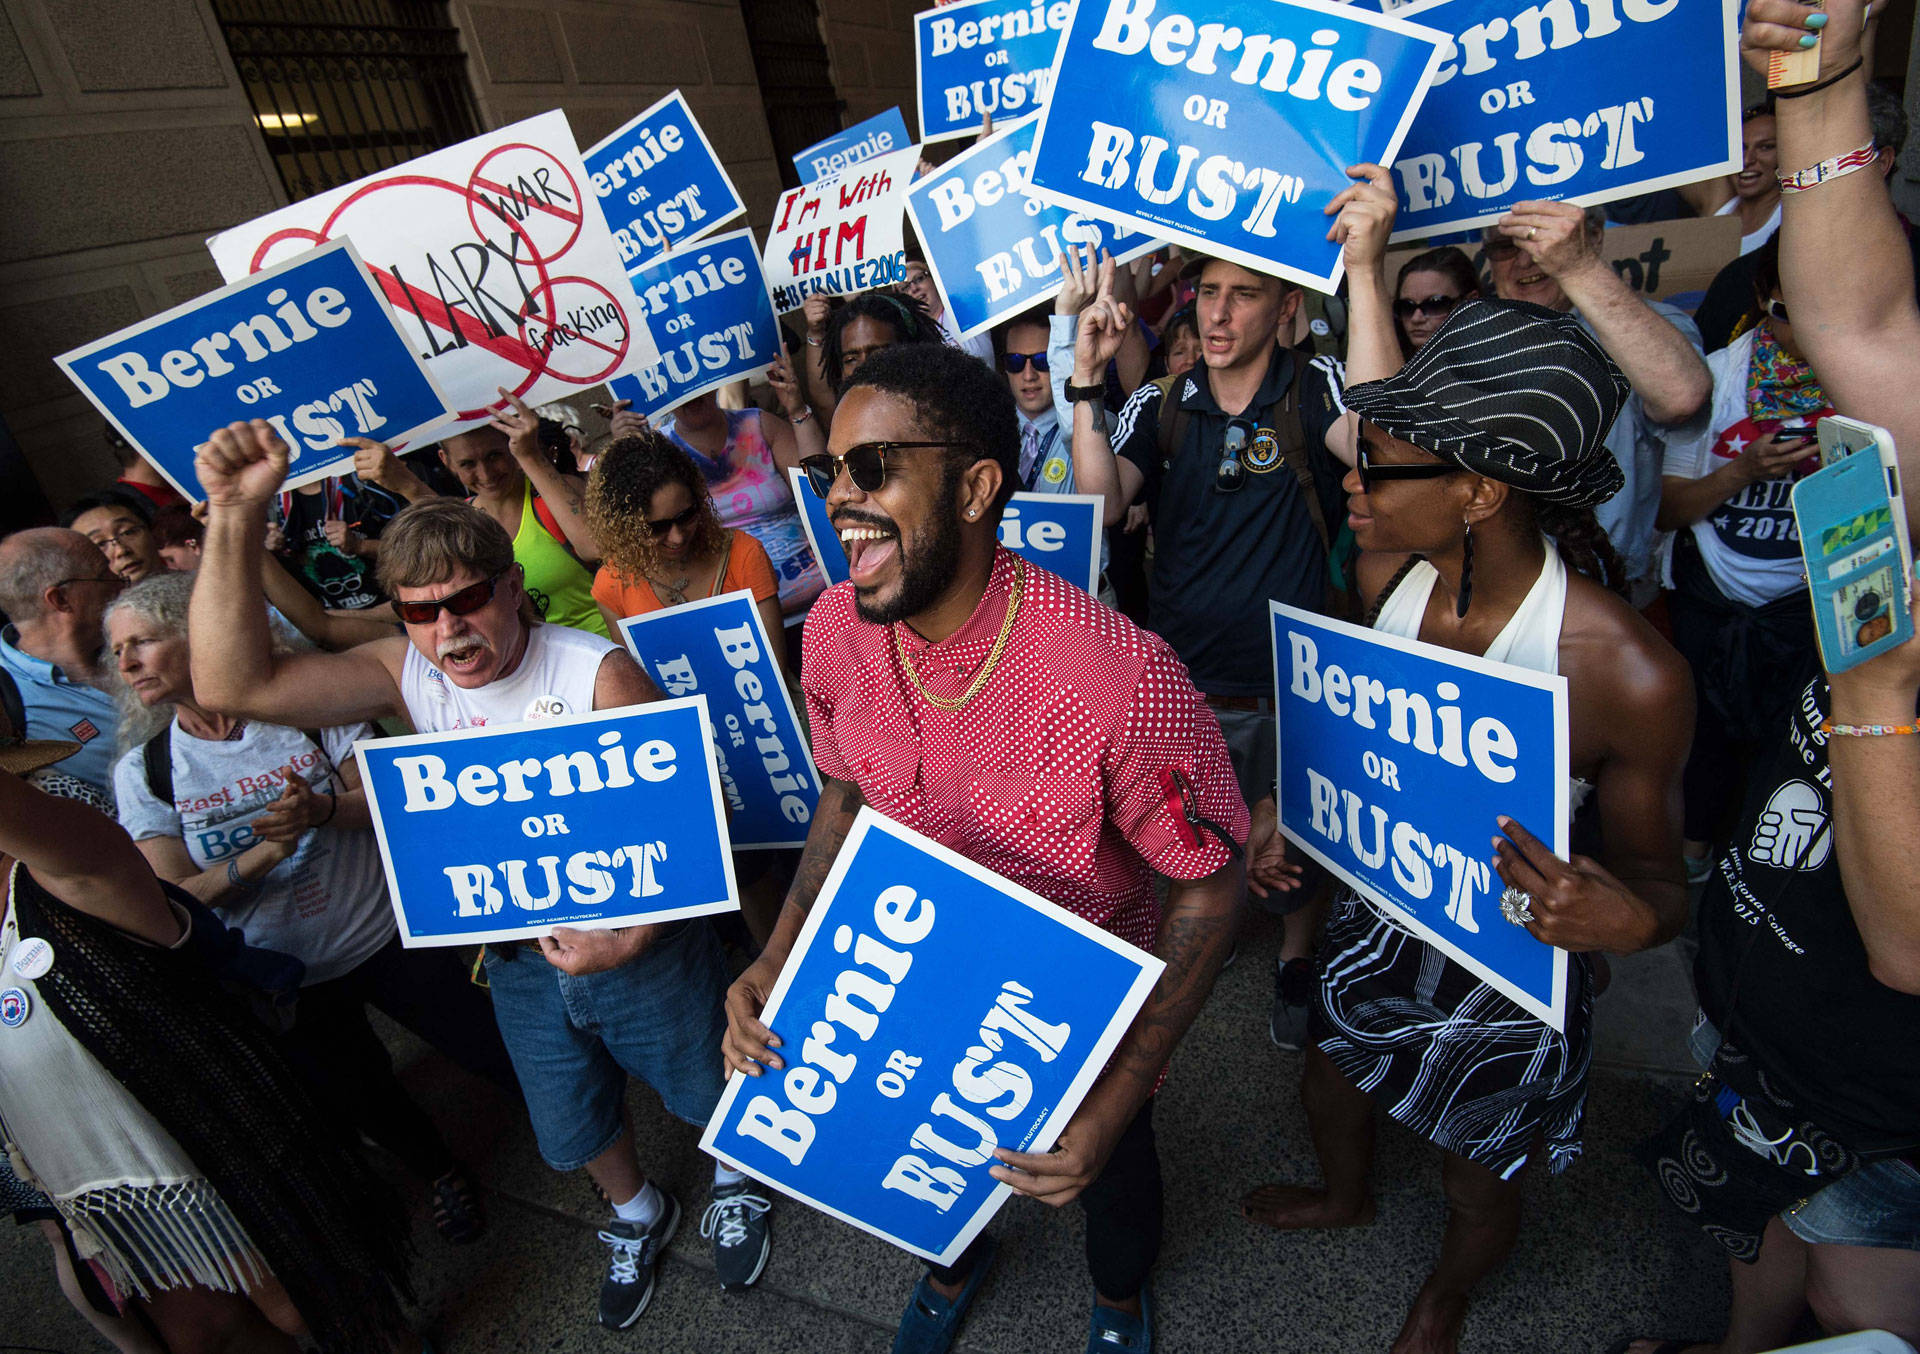 Supporters of Bernie Sanders hold signs at a rally at City Hall in Philadelphia on July 25, 2016.  Nicholas Kamm/AFP/Getty Images